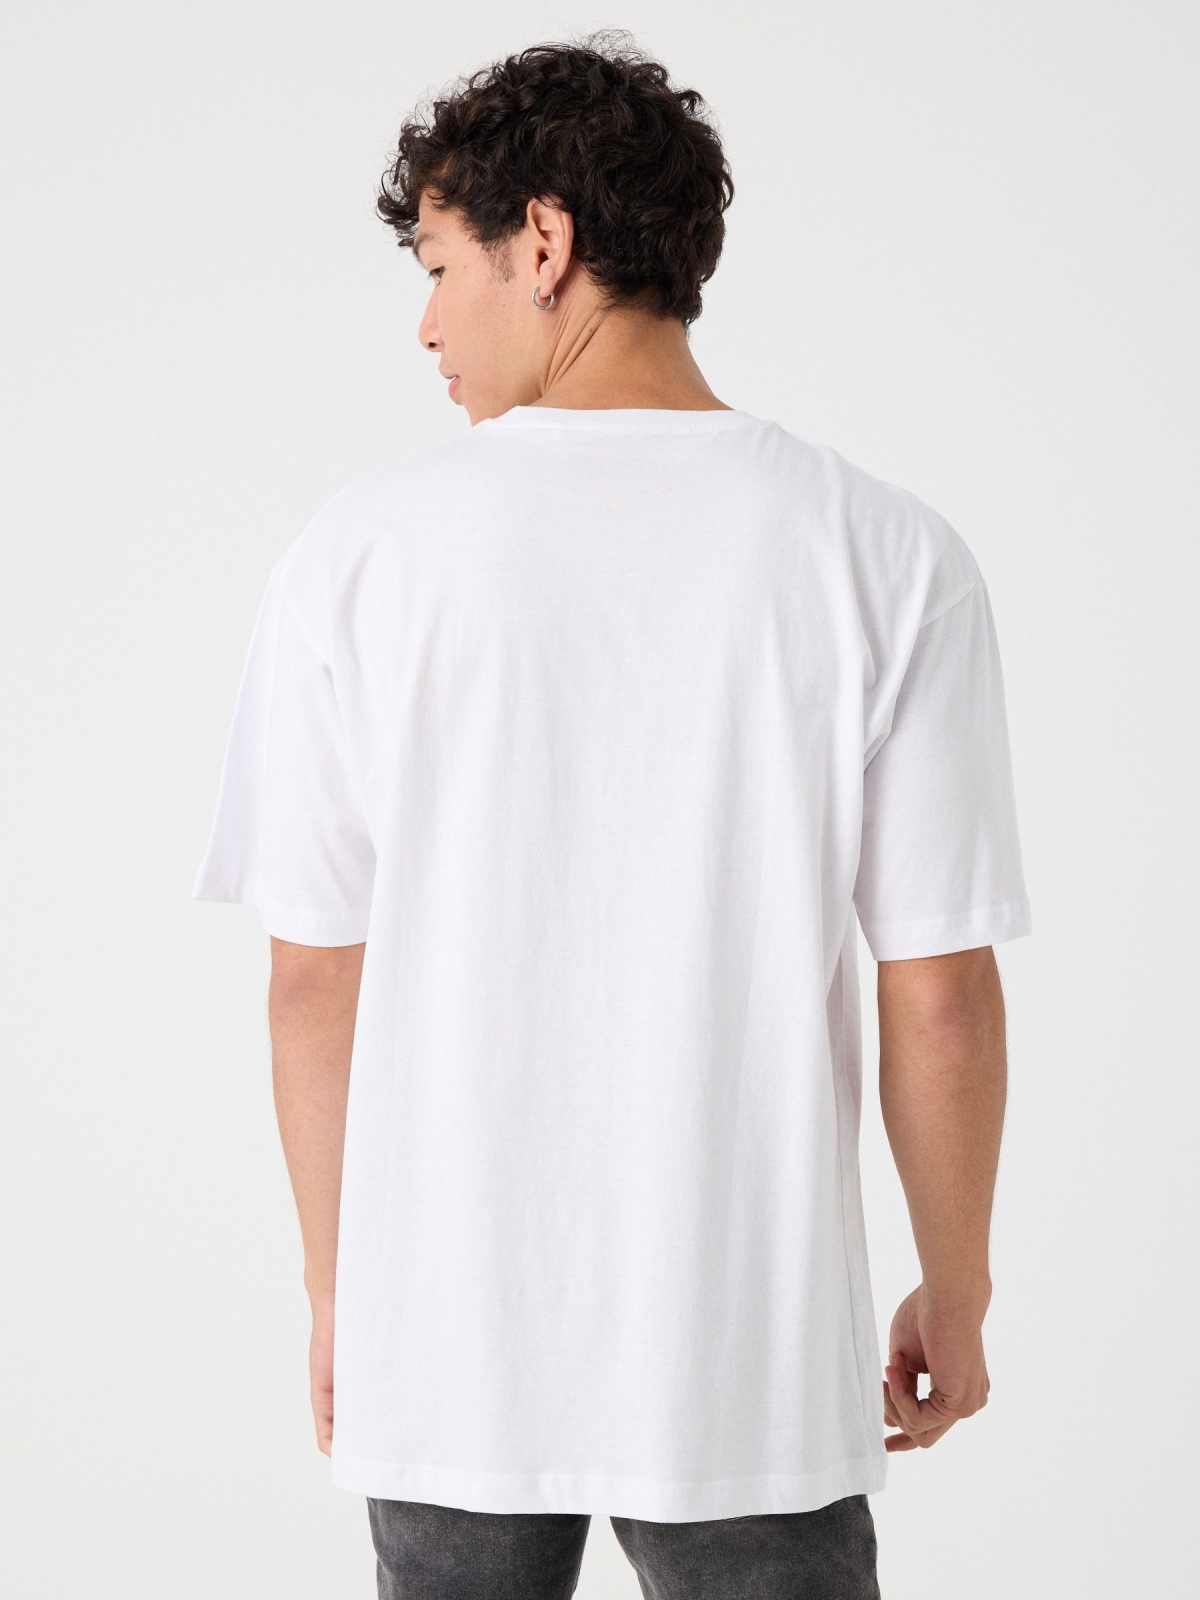 Printed white t-shirt white middle back view